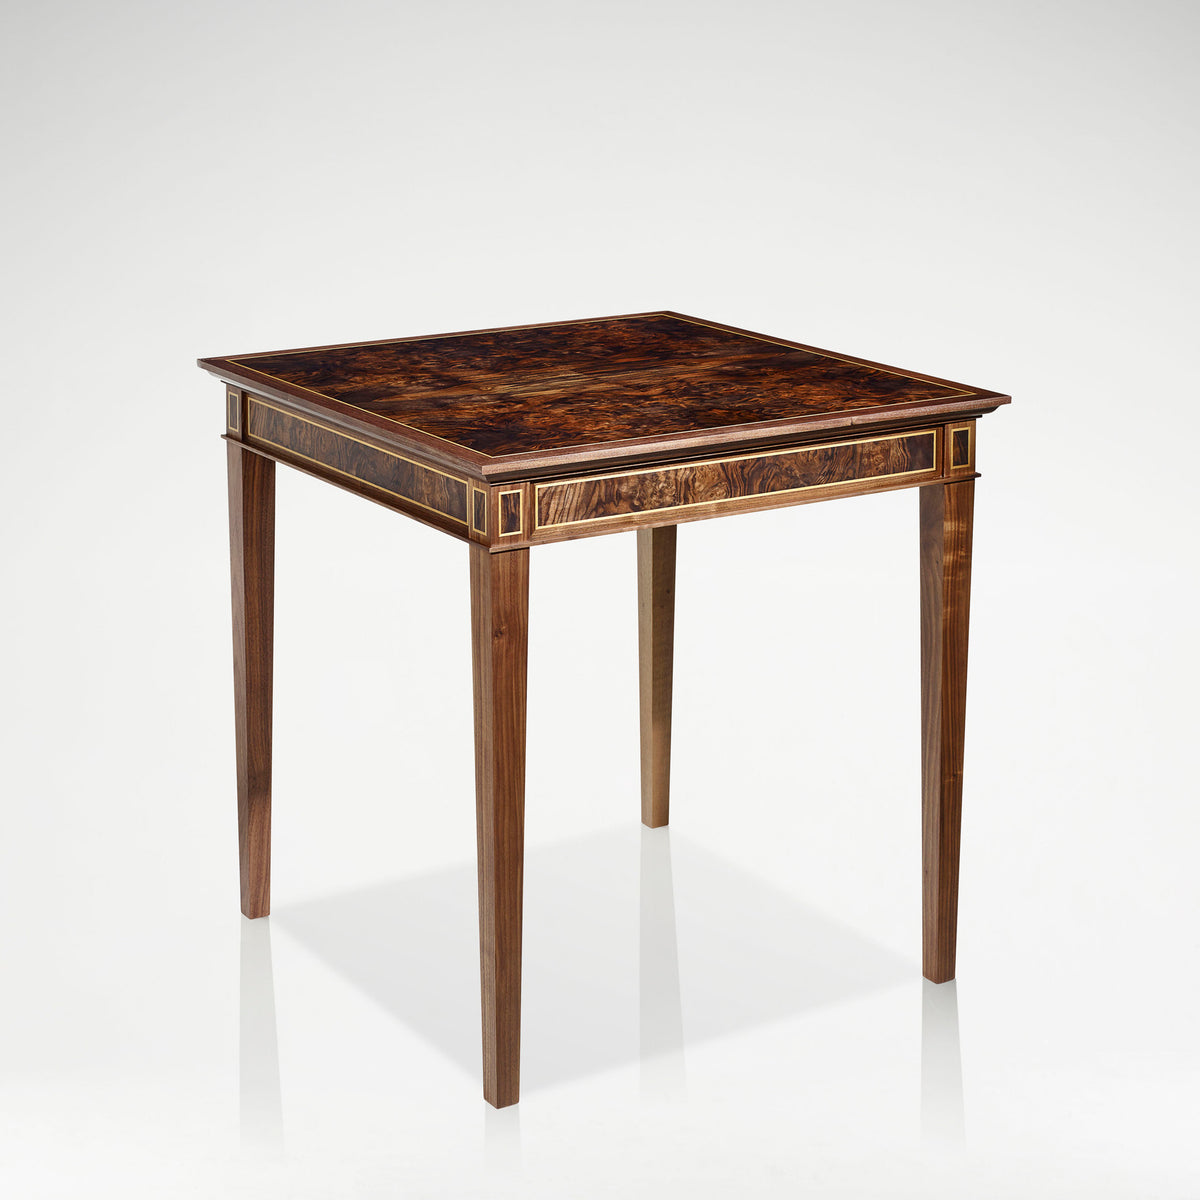 LINLEY Classic Cafe Table | Bespoke Design & Luxury Furniture | LINLEY